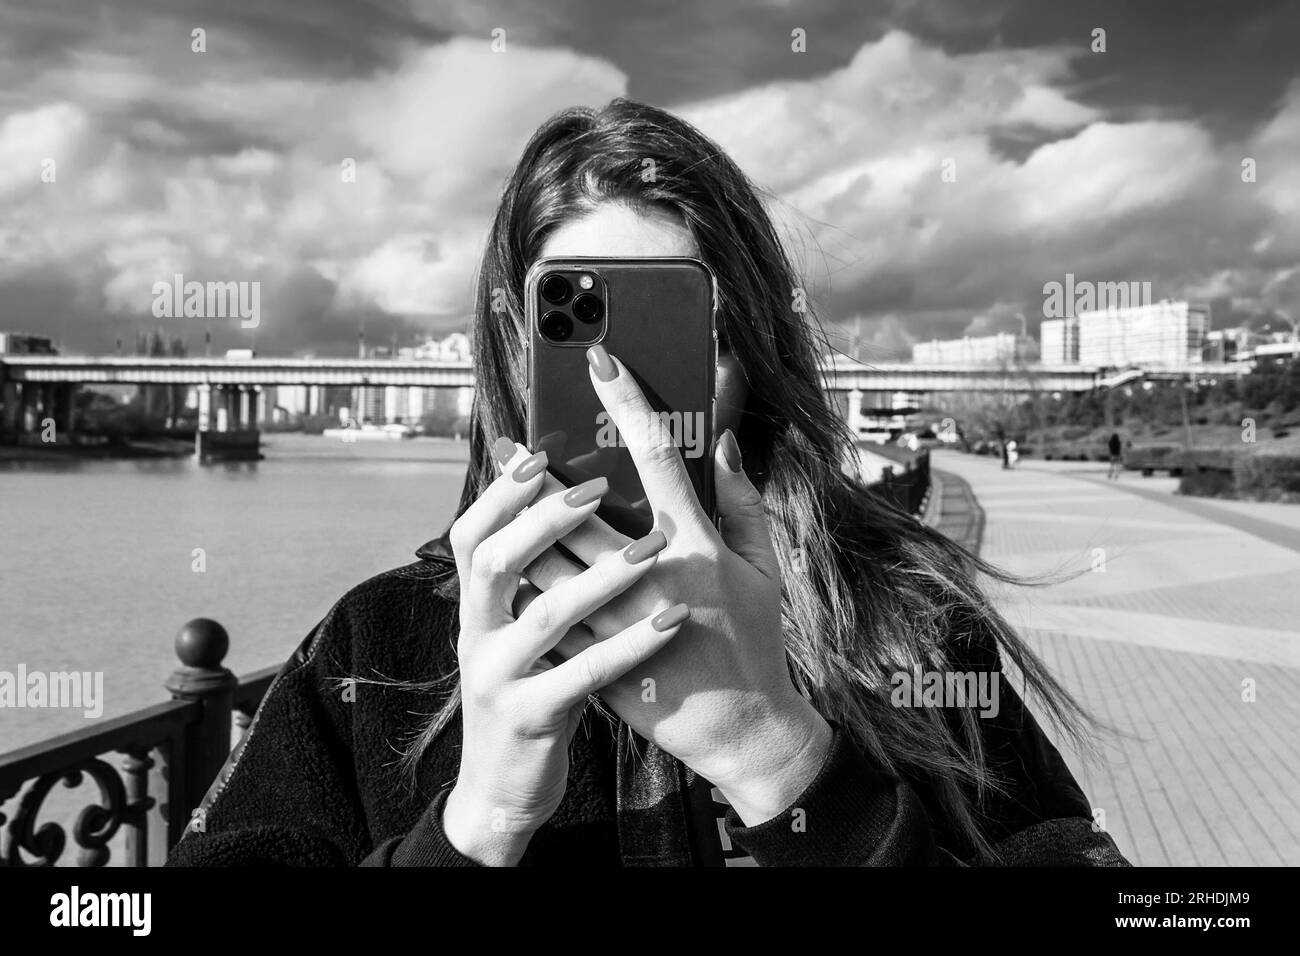 a young woman takes a photo or video on a smartphone covering her face with a smartphone, black and white photo Stock Photo